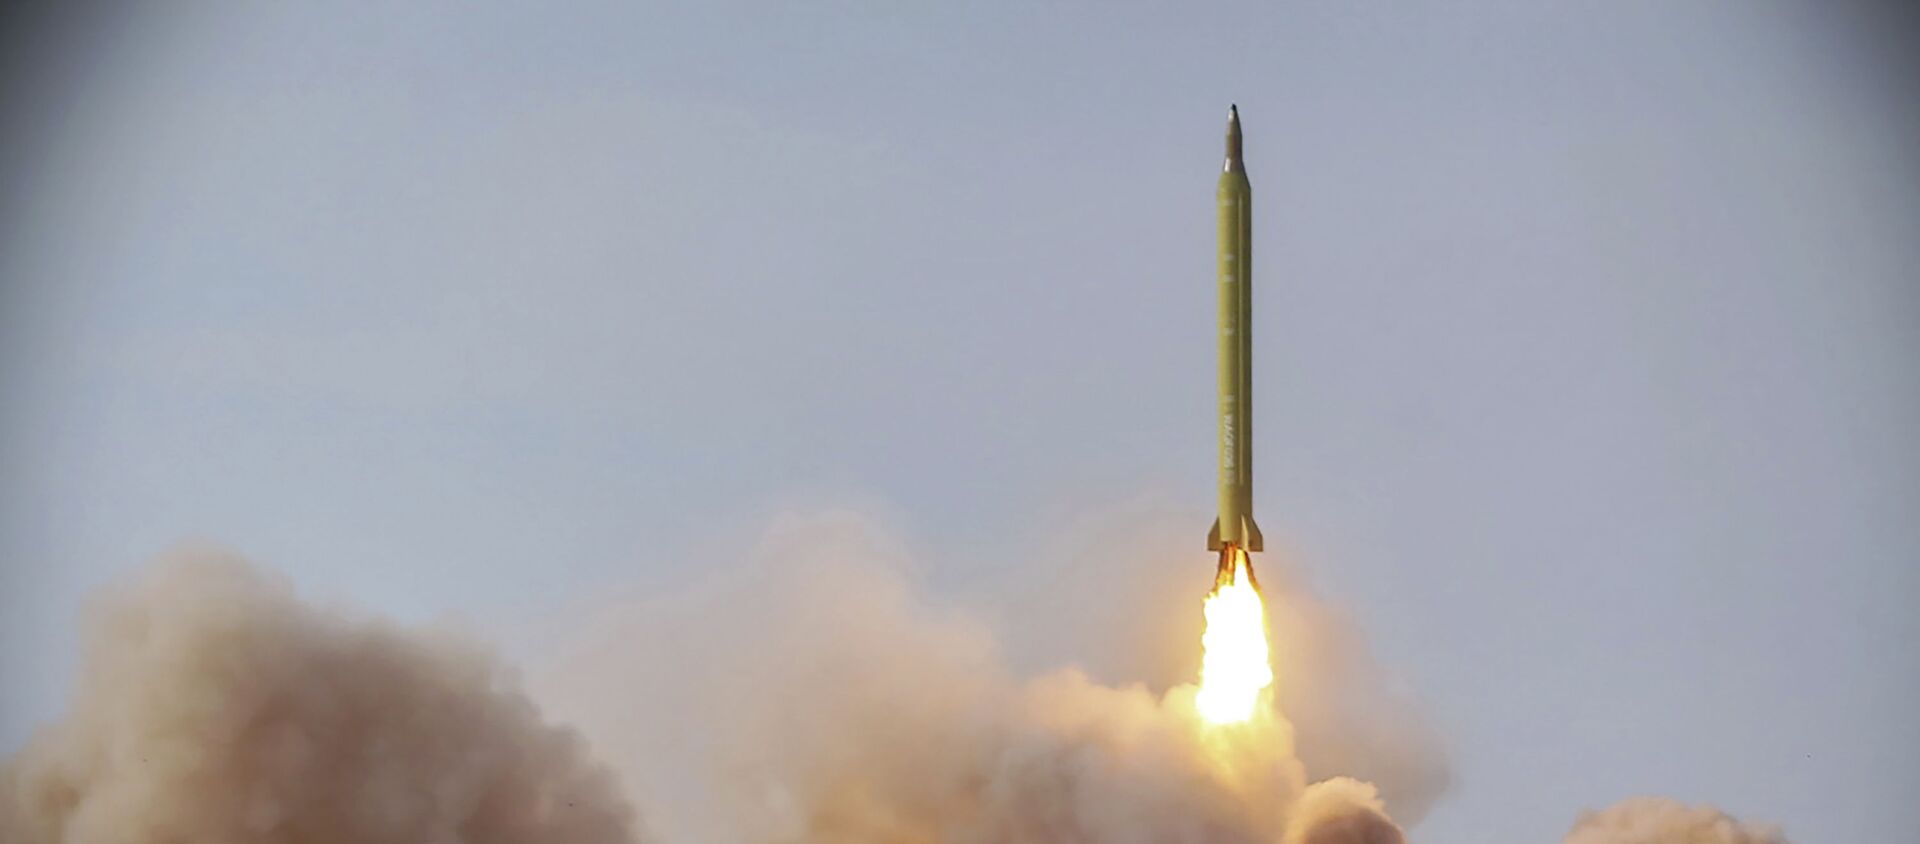 In this file photo released Jan. 16, 2021, by the Iranian Revolutionary Guard, a missile is launched in a drill in Iran. On Tuesday, Jan. 26, 2021, Iran warned the Biden administration that it will not have an indefinite time period to rejoin the 2015 nuclear deal between Tehran and world powers. - Sputnik International, 1920, 07.02.2021